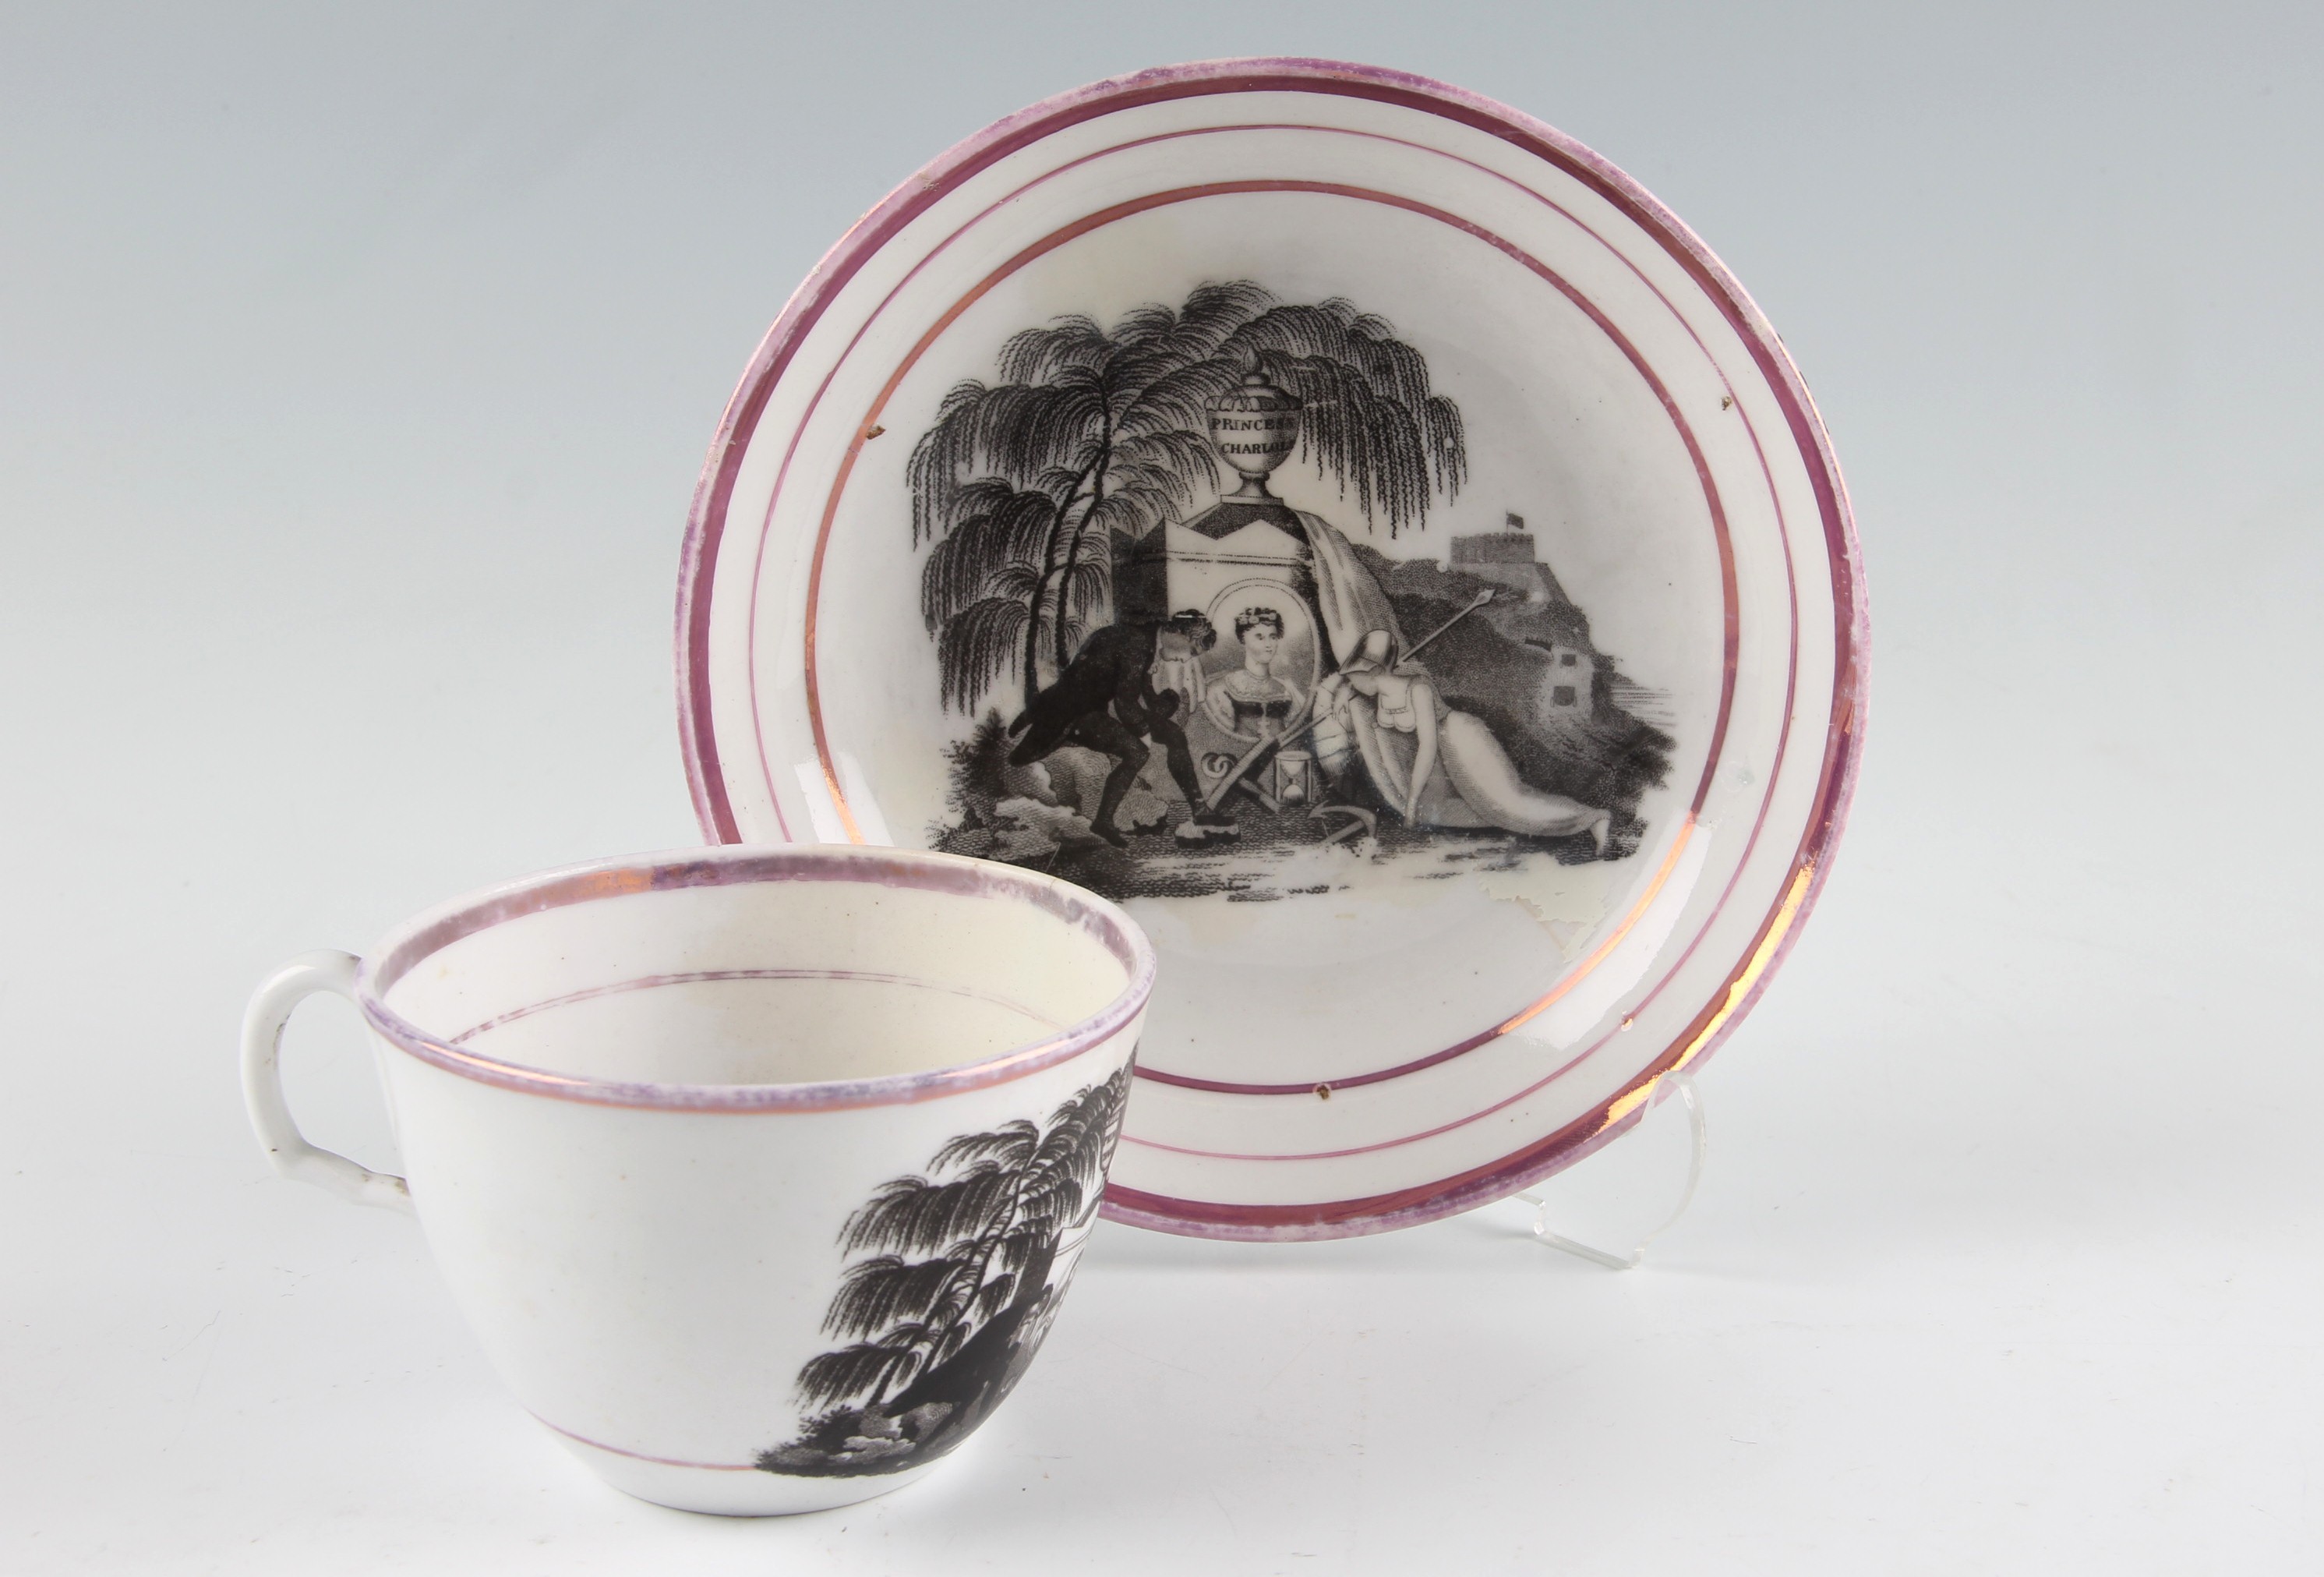 A 19th Century Staffordshire porcelain Royal commemorative teacup and saucer, bat printed in black